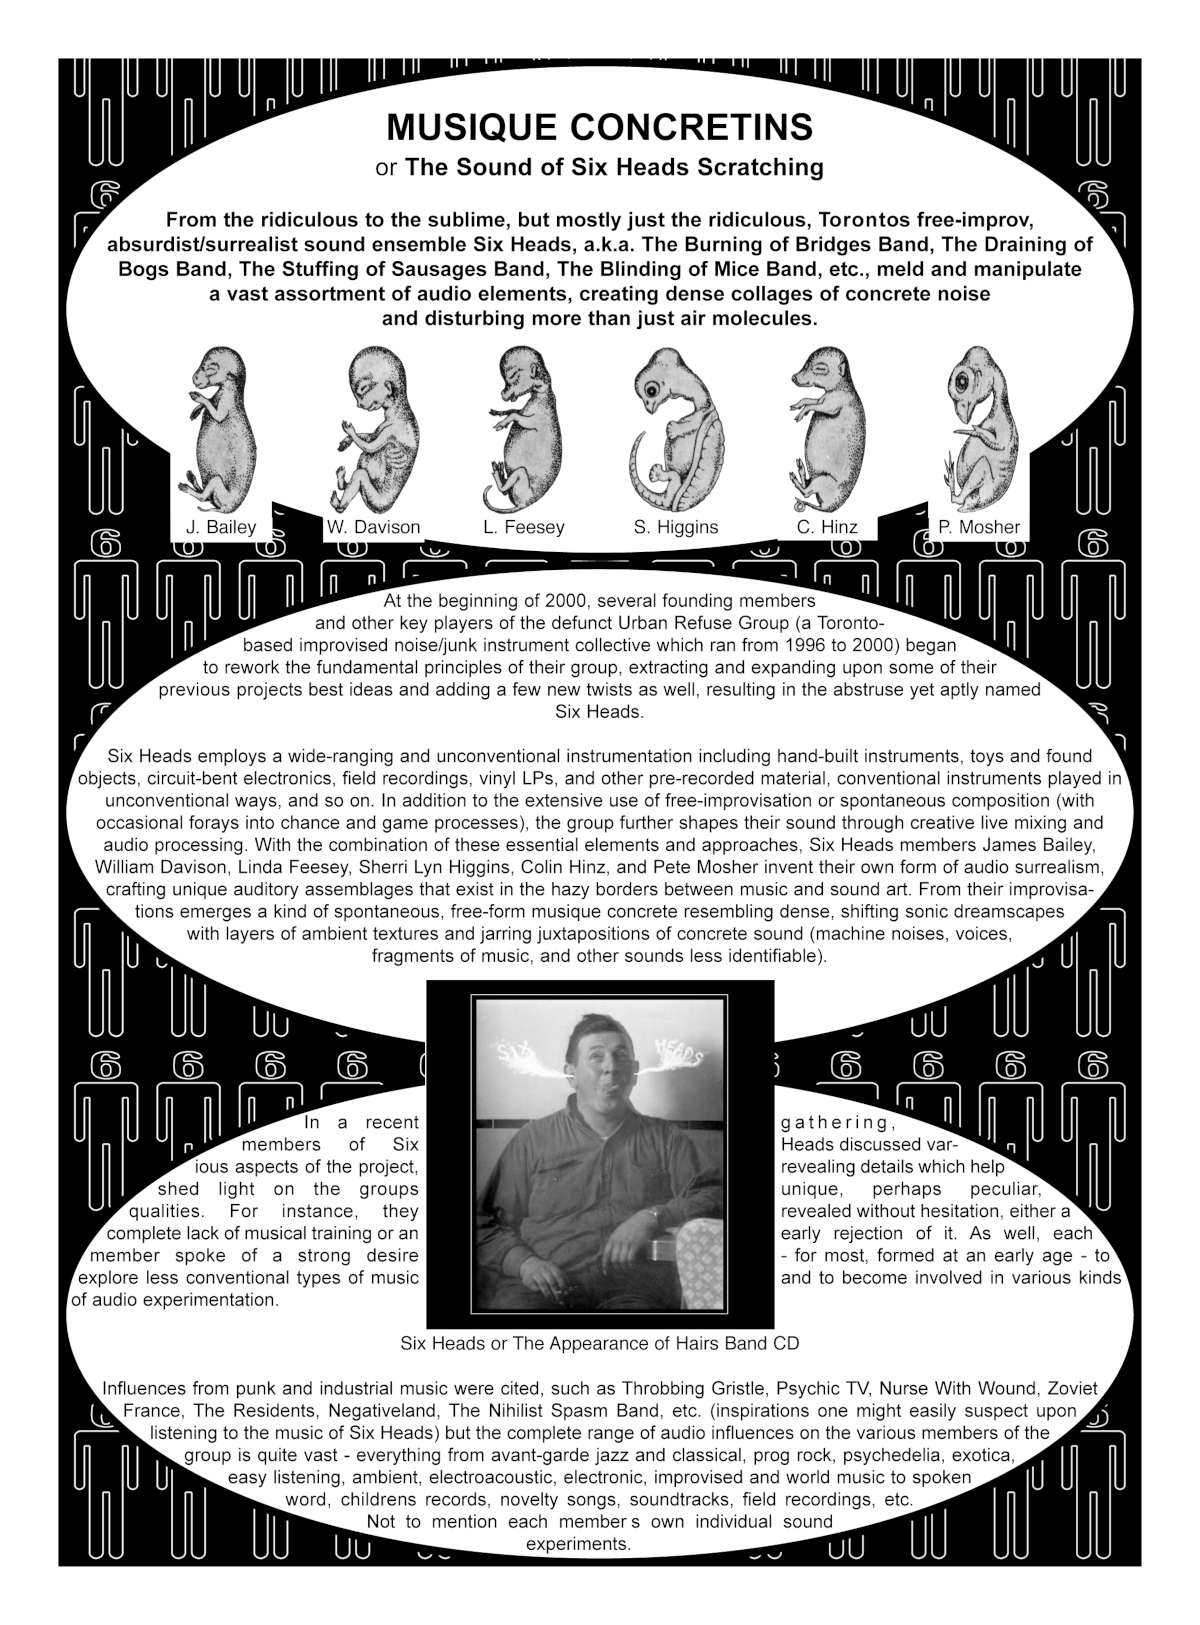 Six Heads article page 1